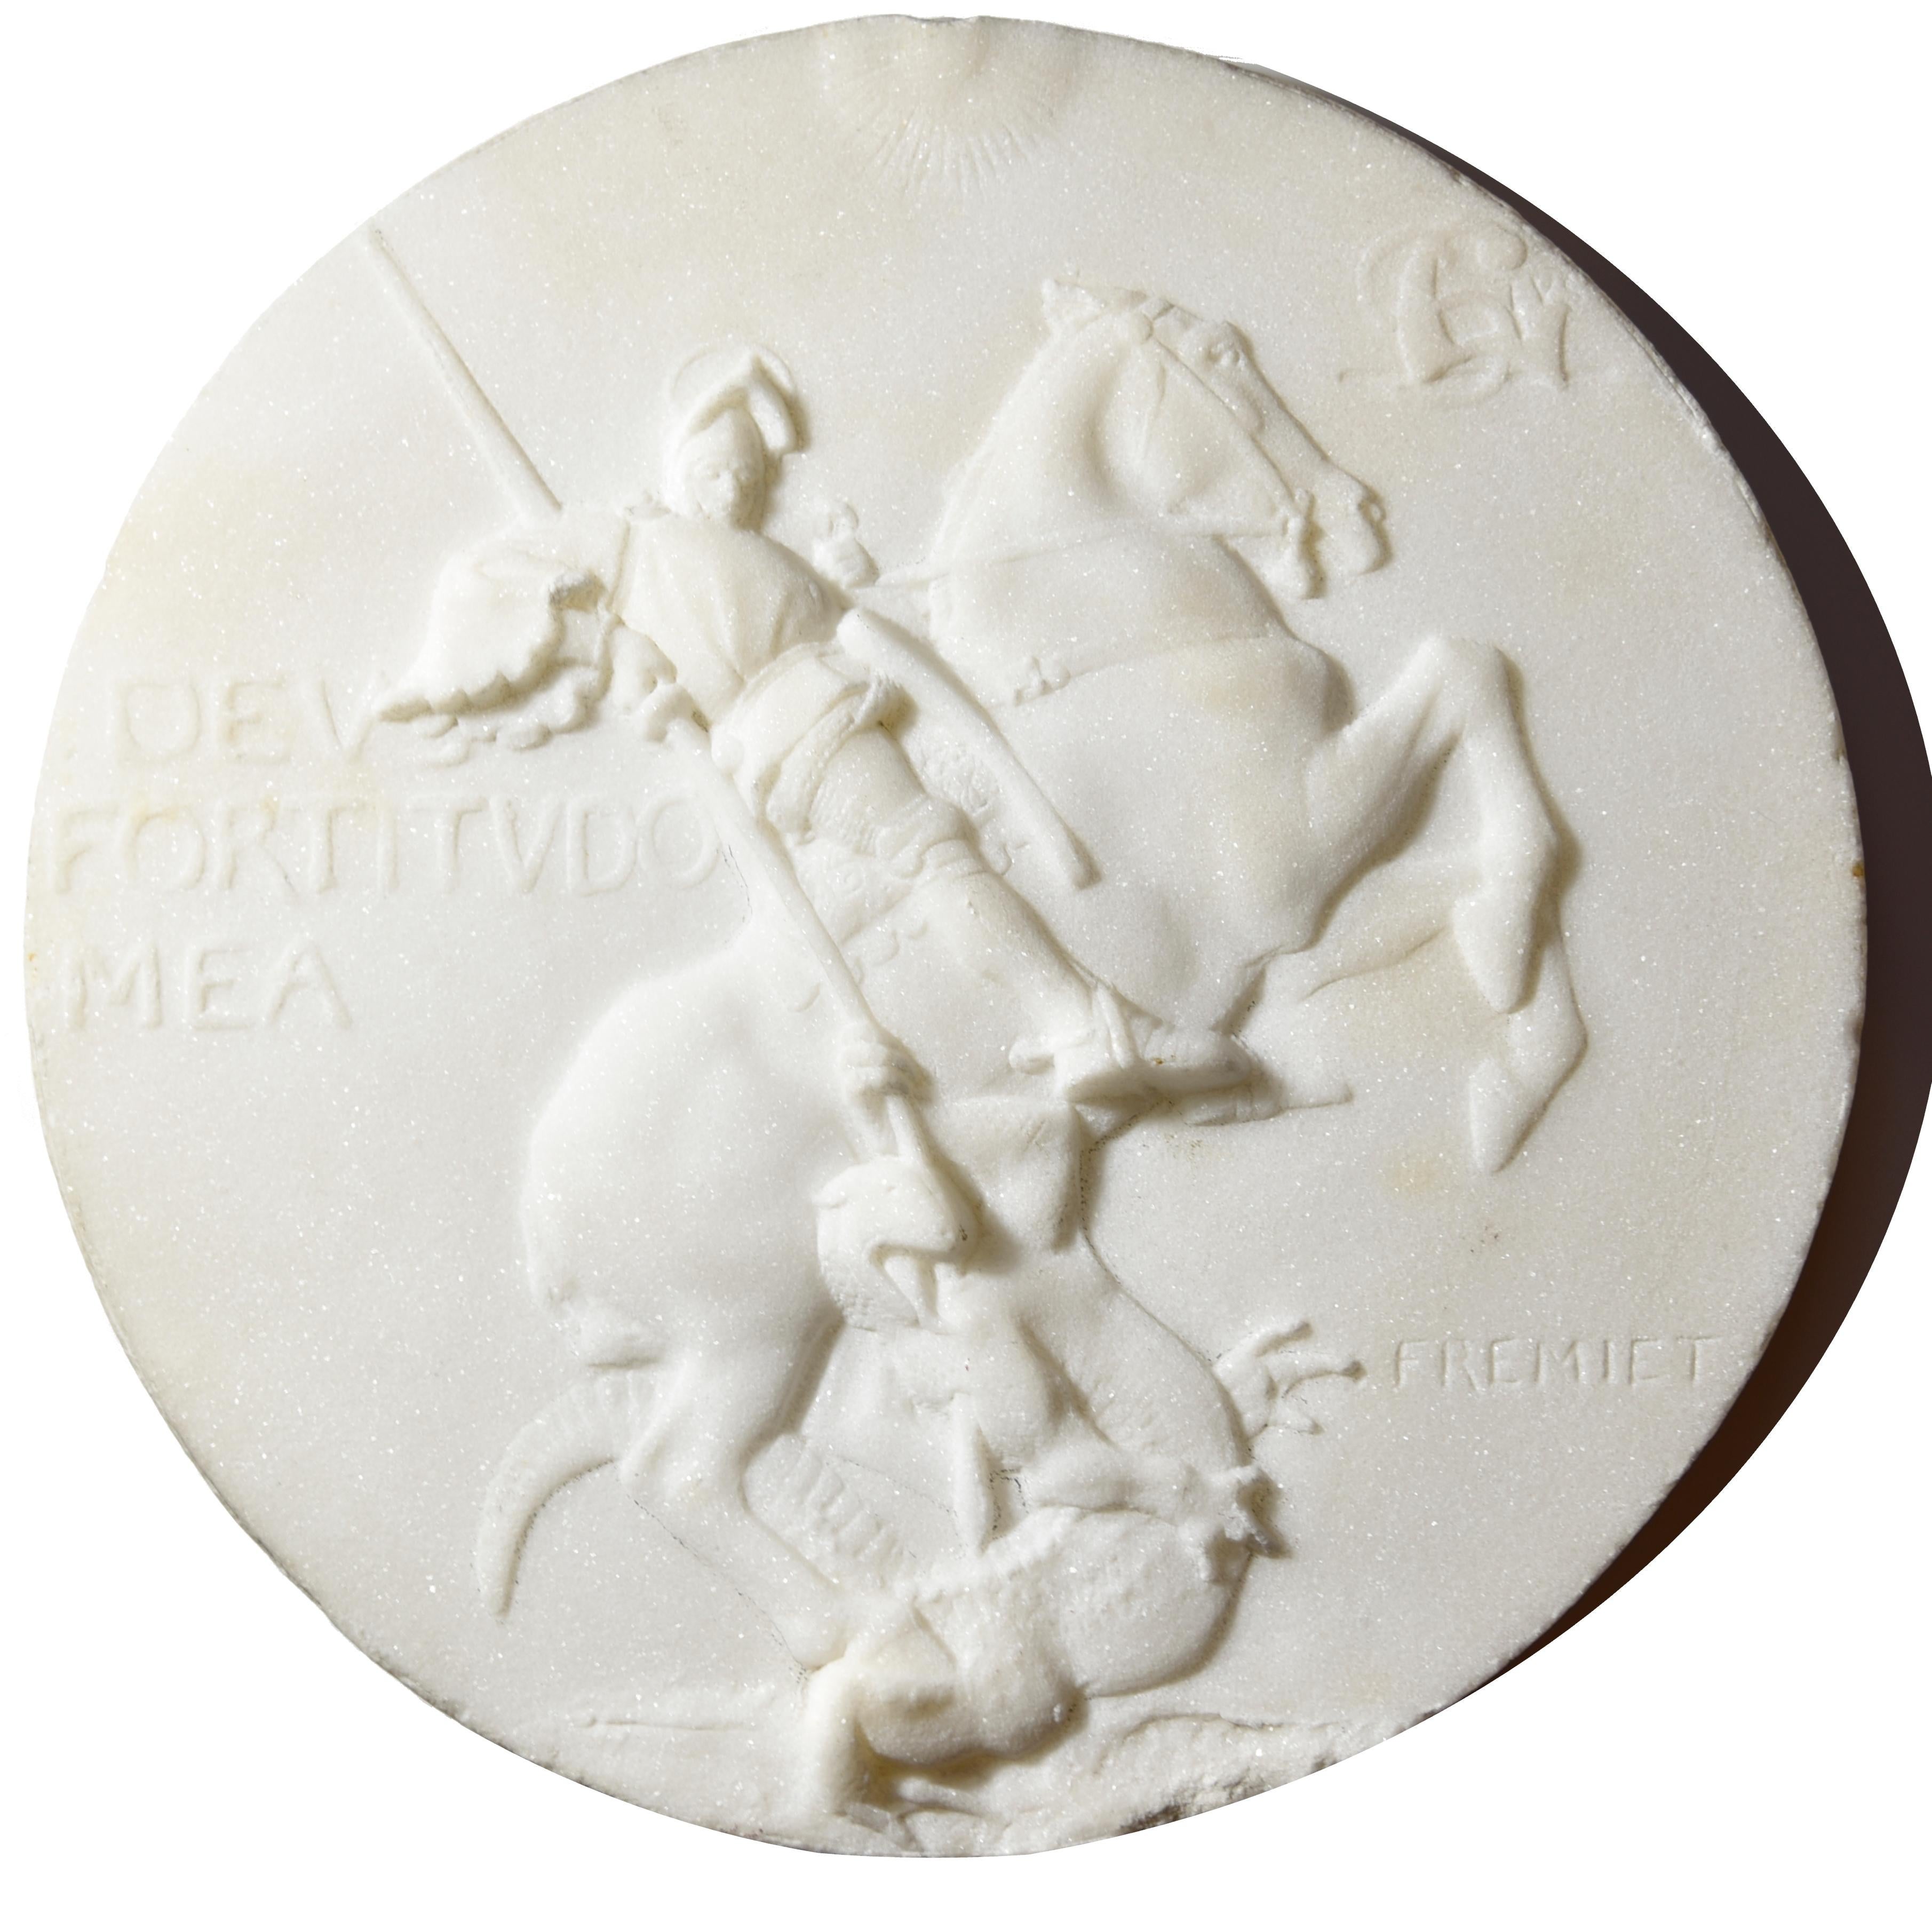 marble medallion of St Georges slaying the dragon - Sculpture by Emmanuel Fremiet